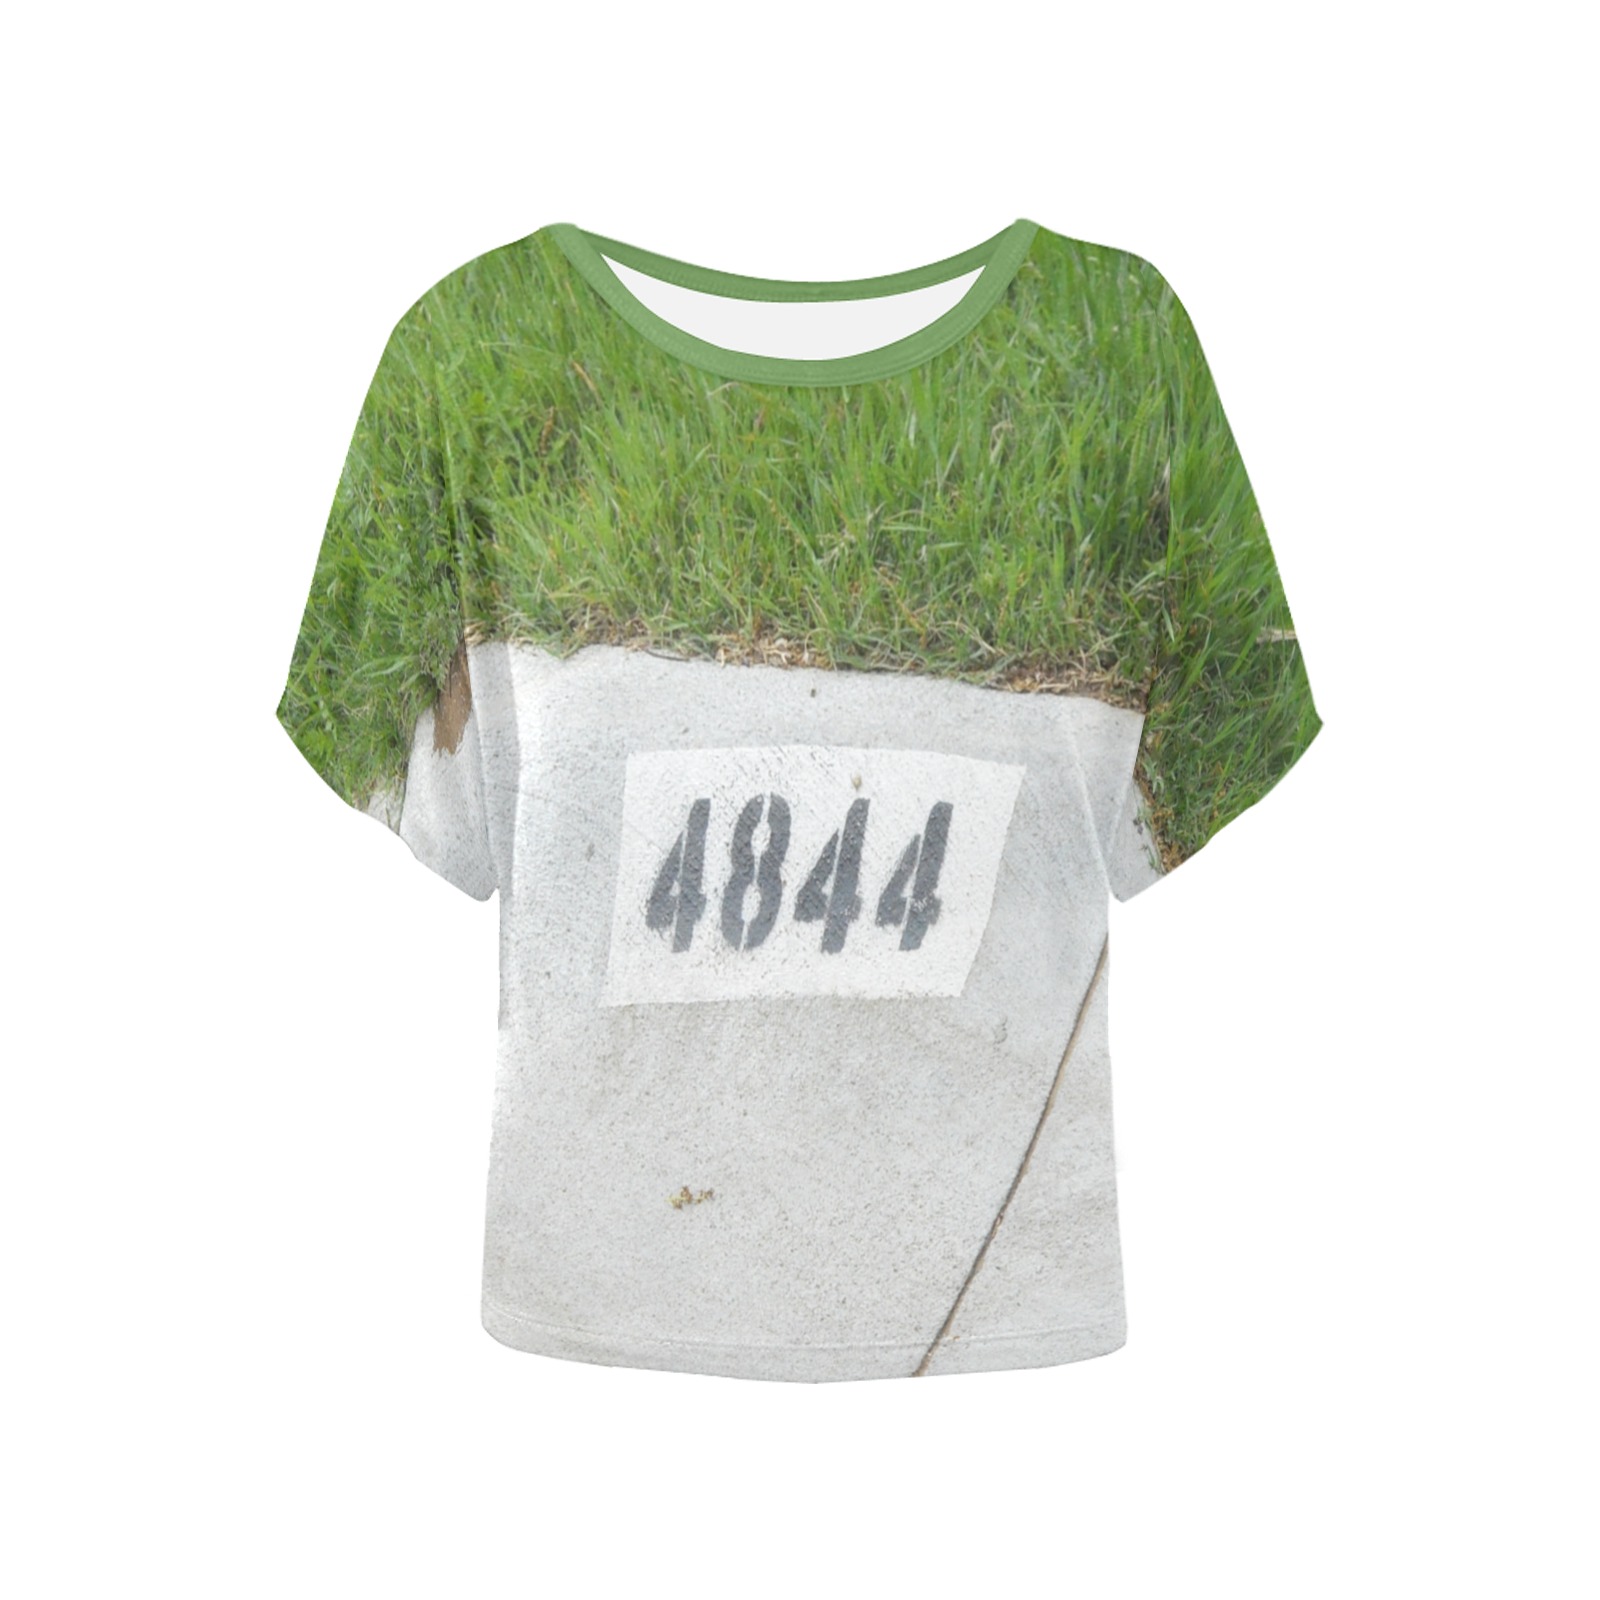 Street Number 4844 with green collar Women's Batwing-Sleeved Blouse T shirt (Model T44)